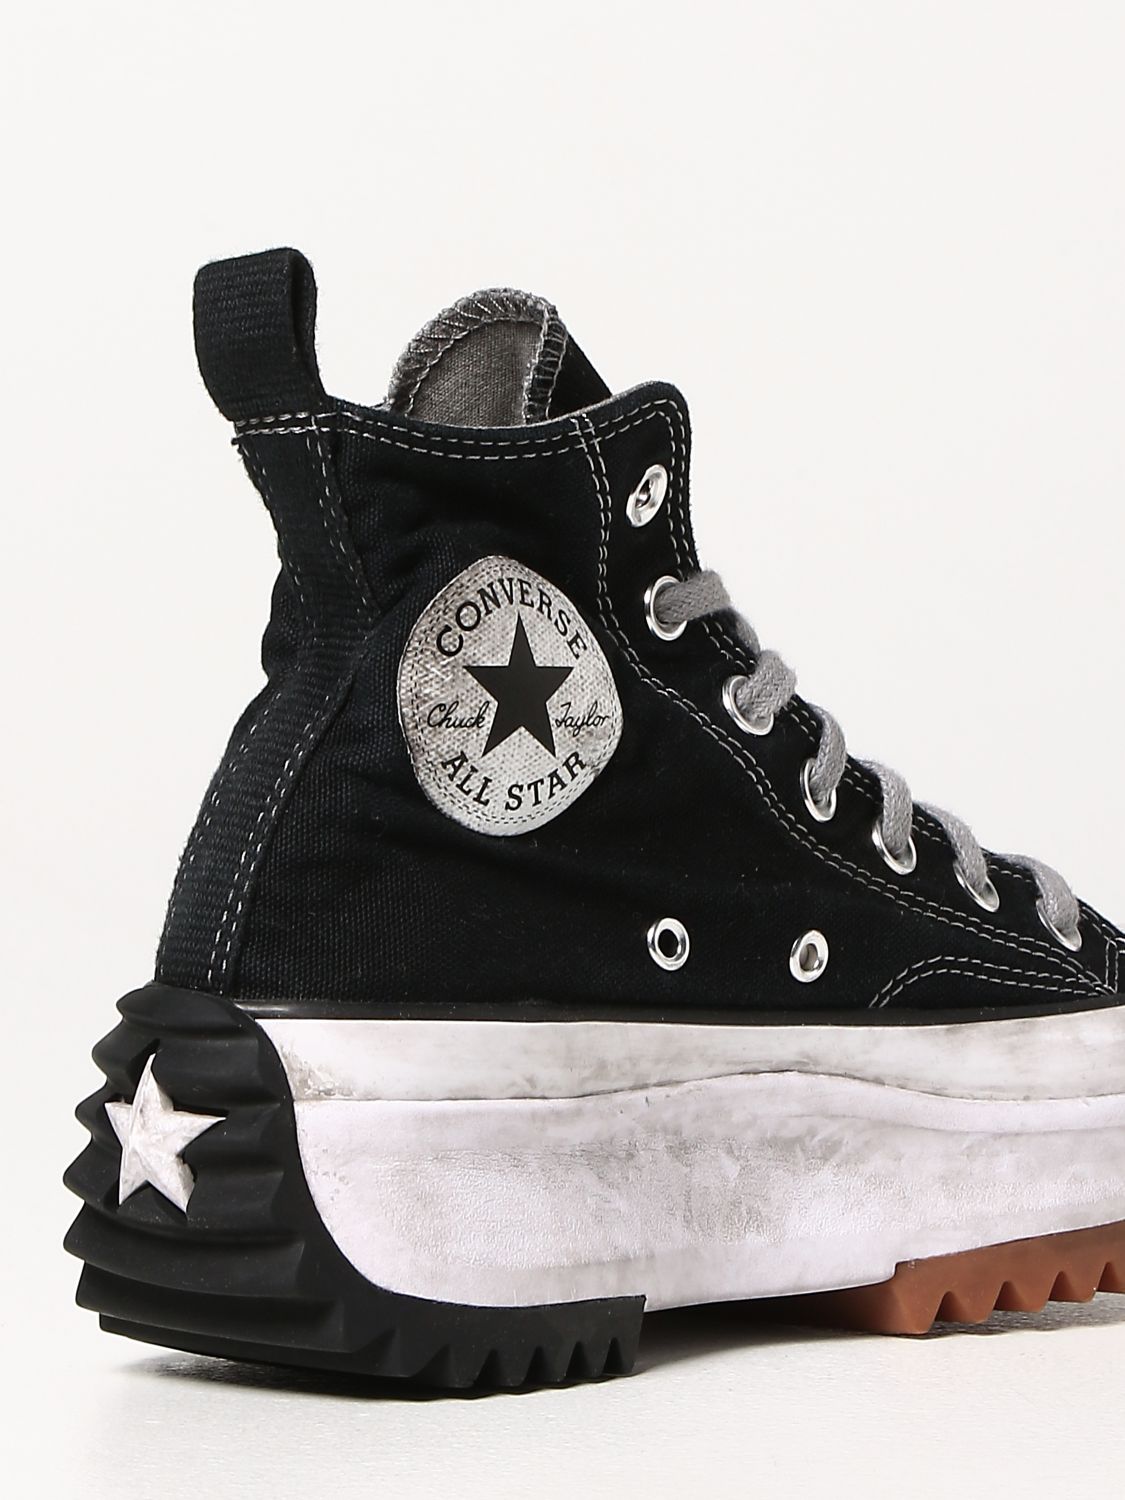 converse shoes limited edition